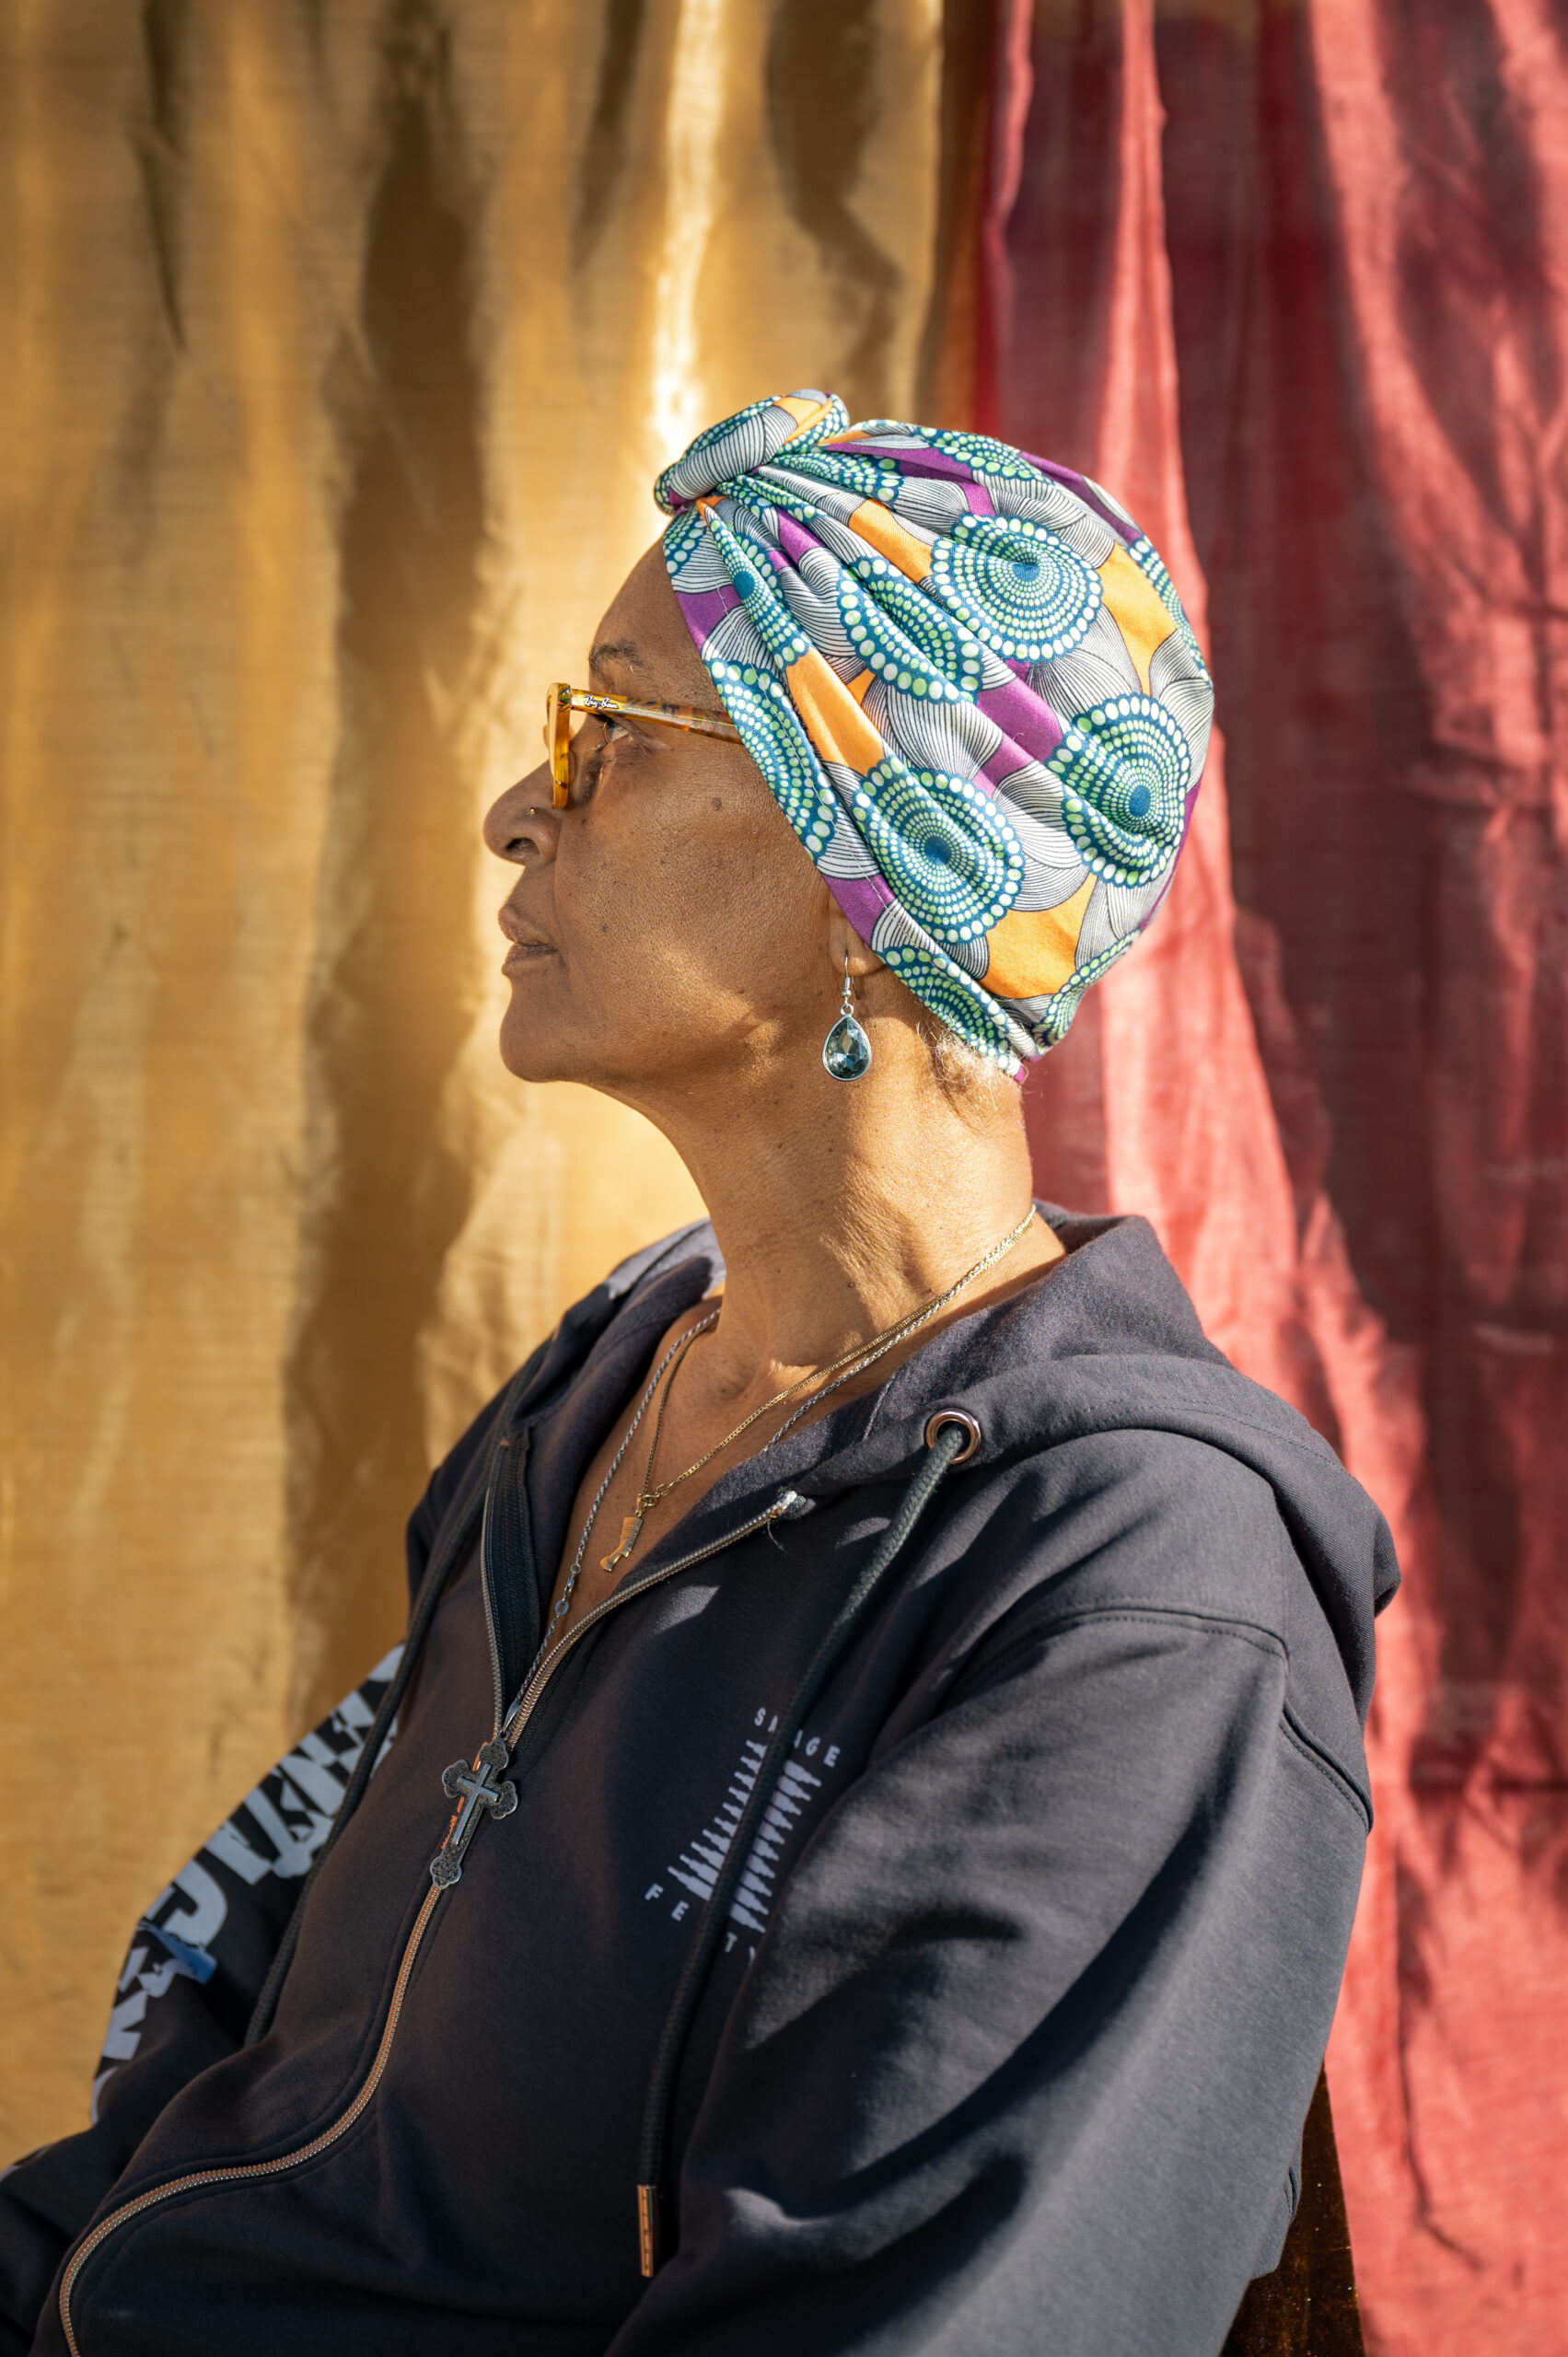 An older Black woman sits in profile, wearing a blue hoodie, gold metal glasses and a carefully tied blue, yellow white and purple patterned scarf tied over her gray locks. An earring with a blue tear-drop shaped jewel is visible in her left ear.